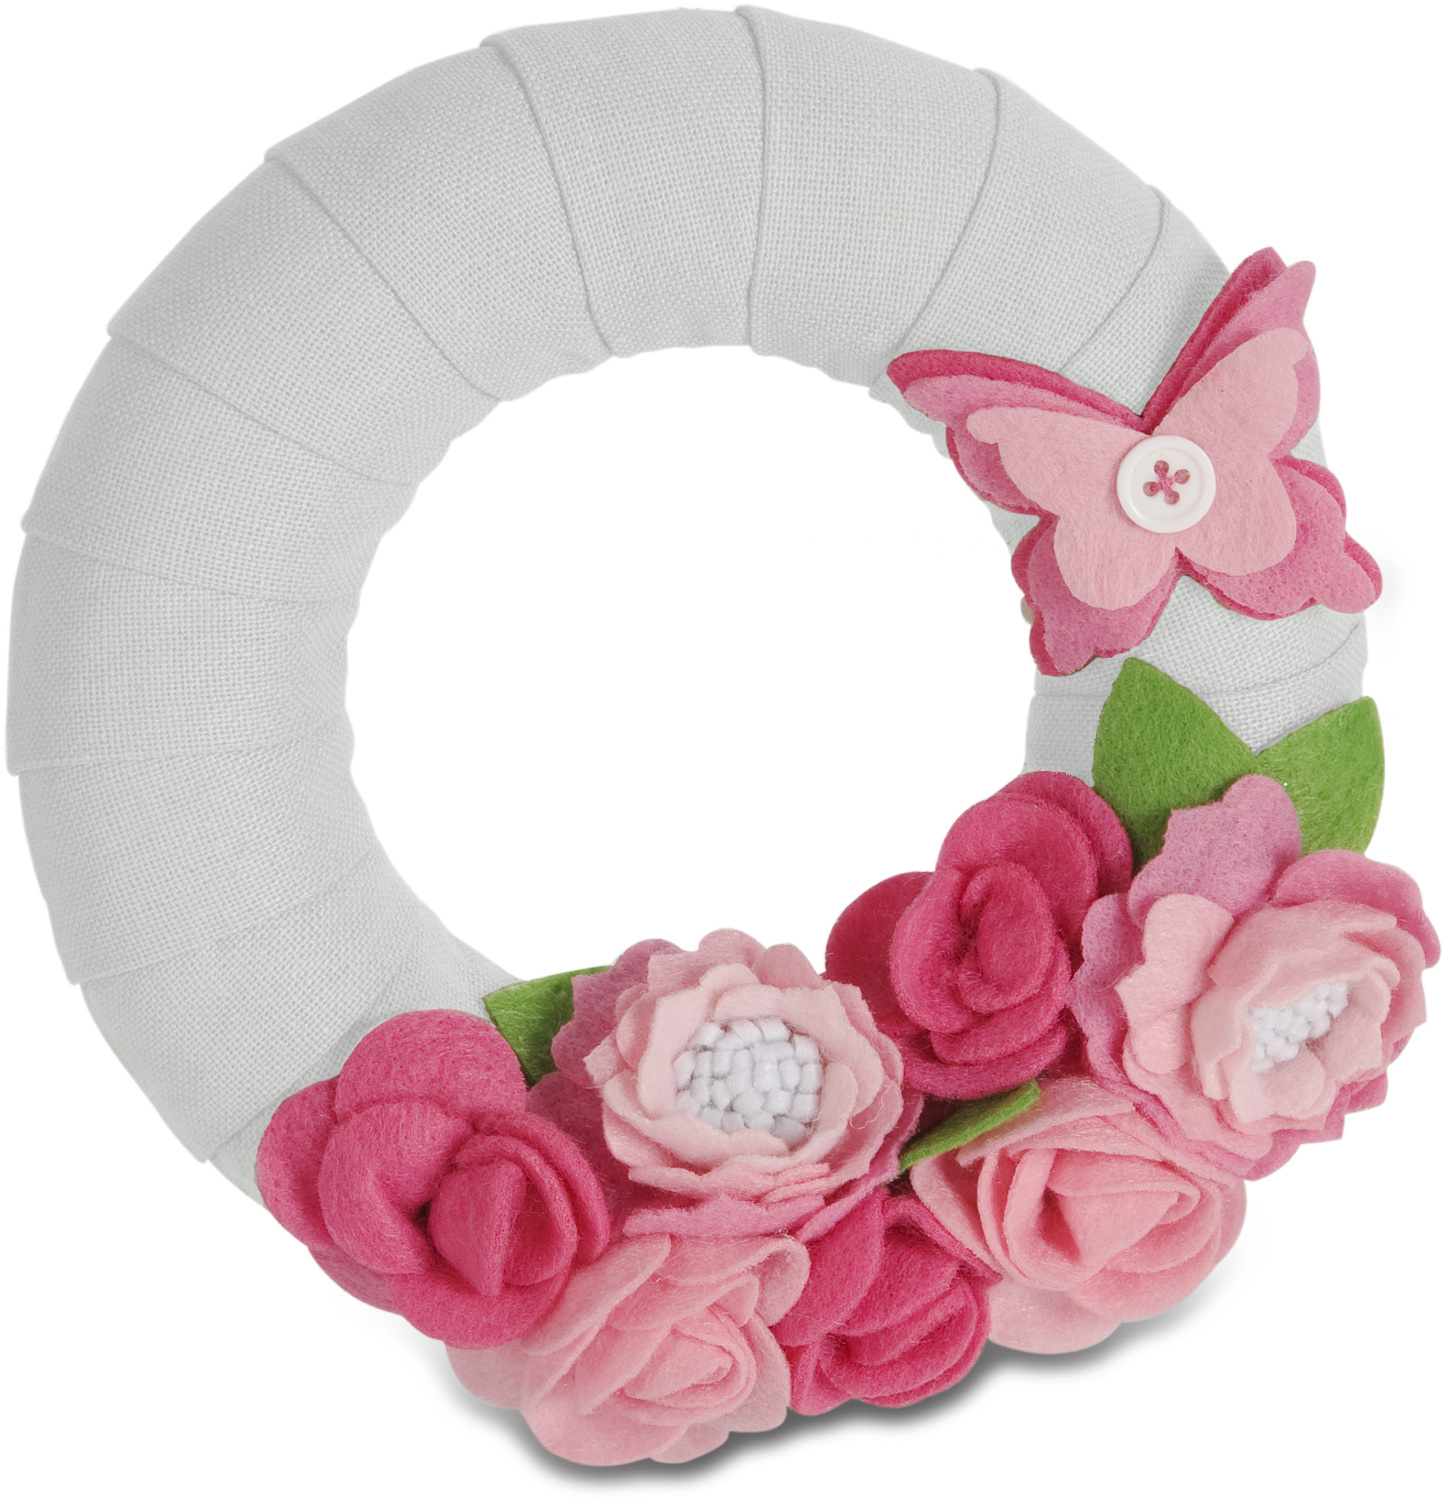 Pretty in Pink by Signs of Happiness - Pretty in Pink - 6" Wreath